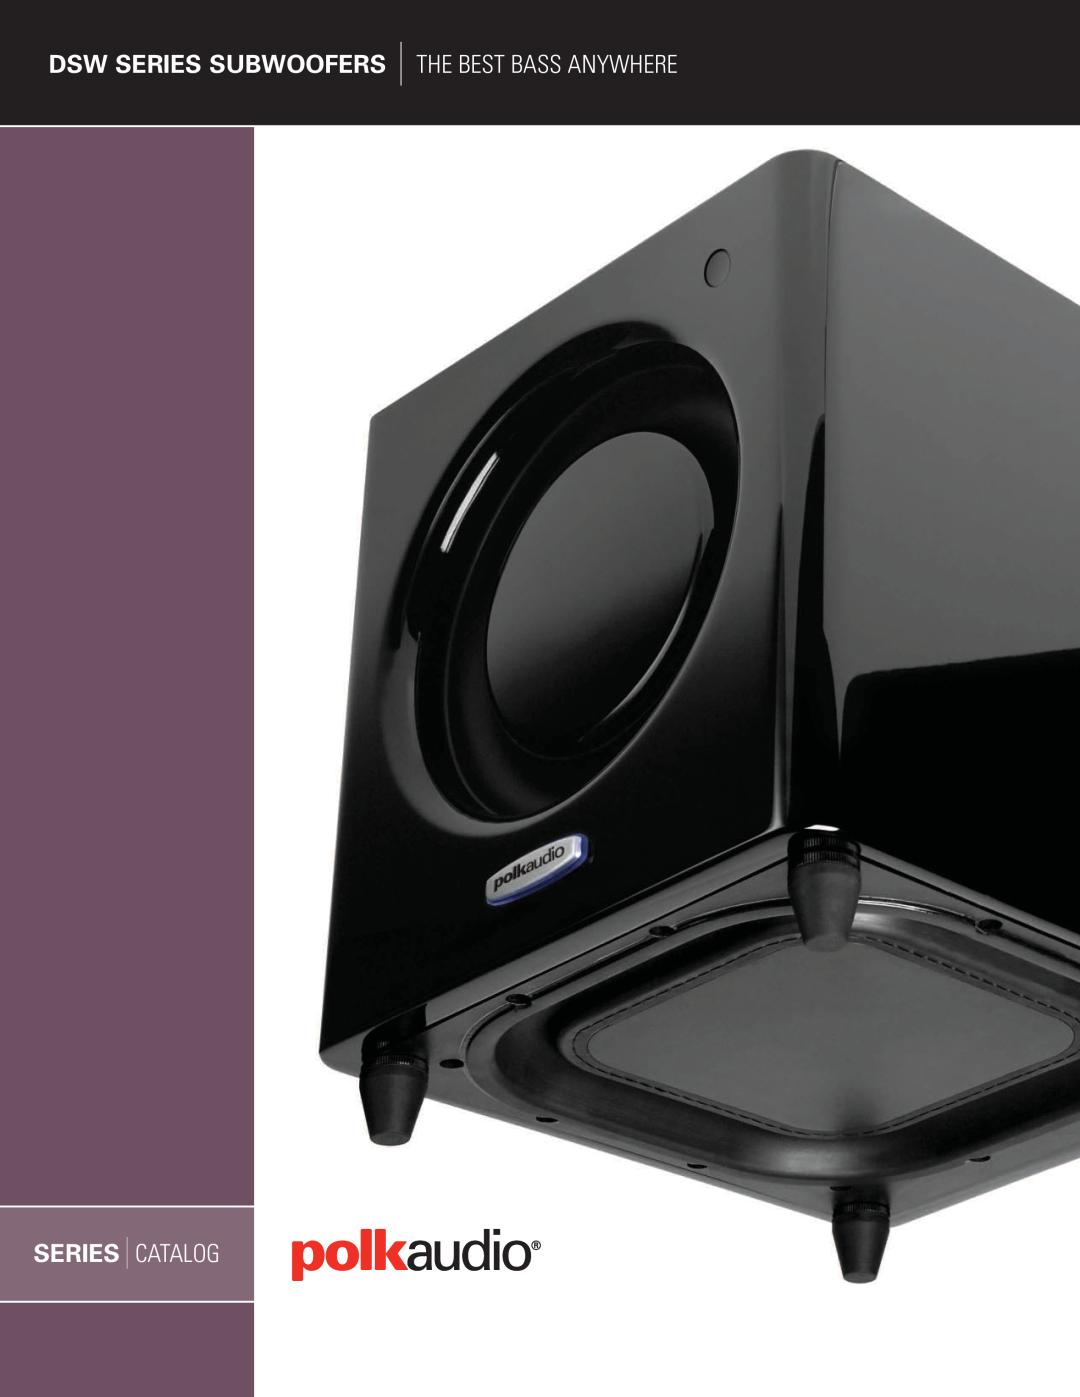 Polk Audio DSW Series manual Dsw Series Subwoofers, The Best Bass Anywhere, Catalog 